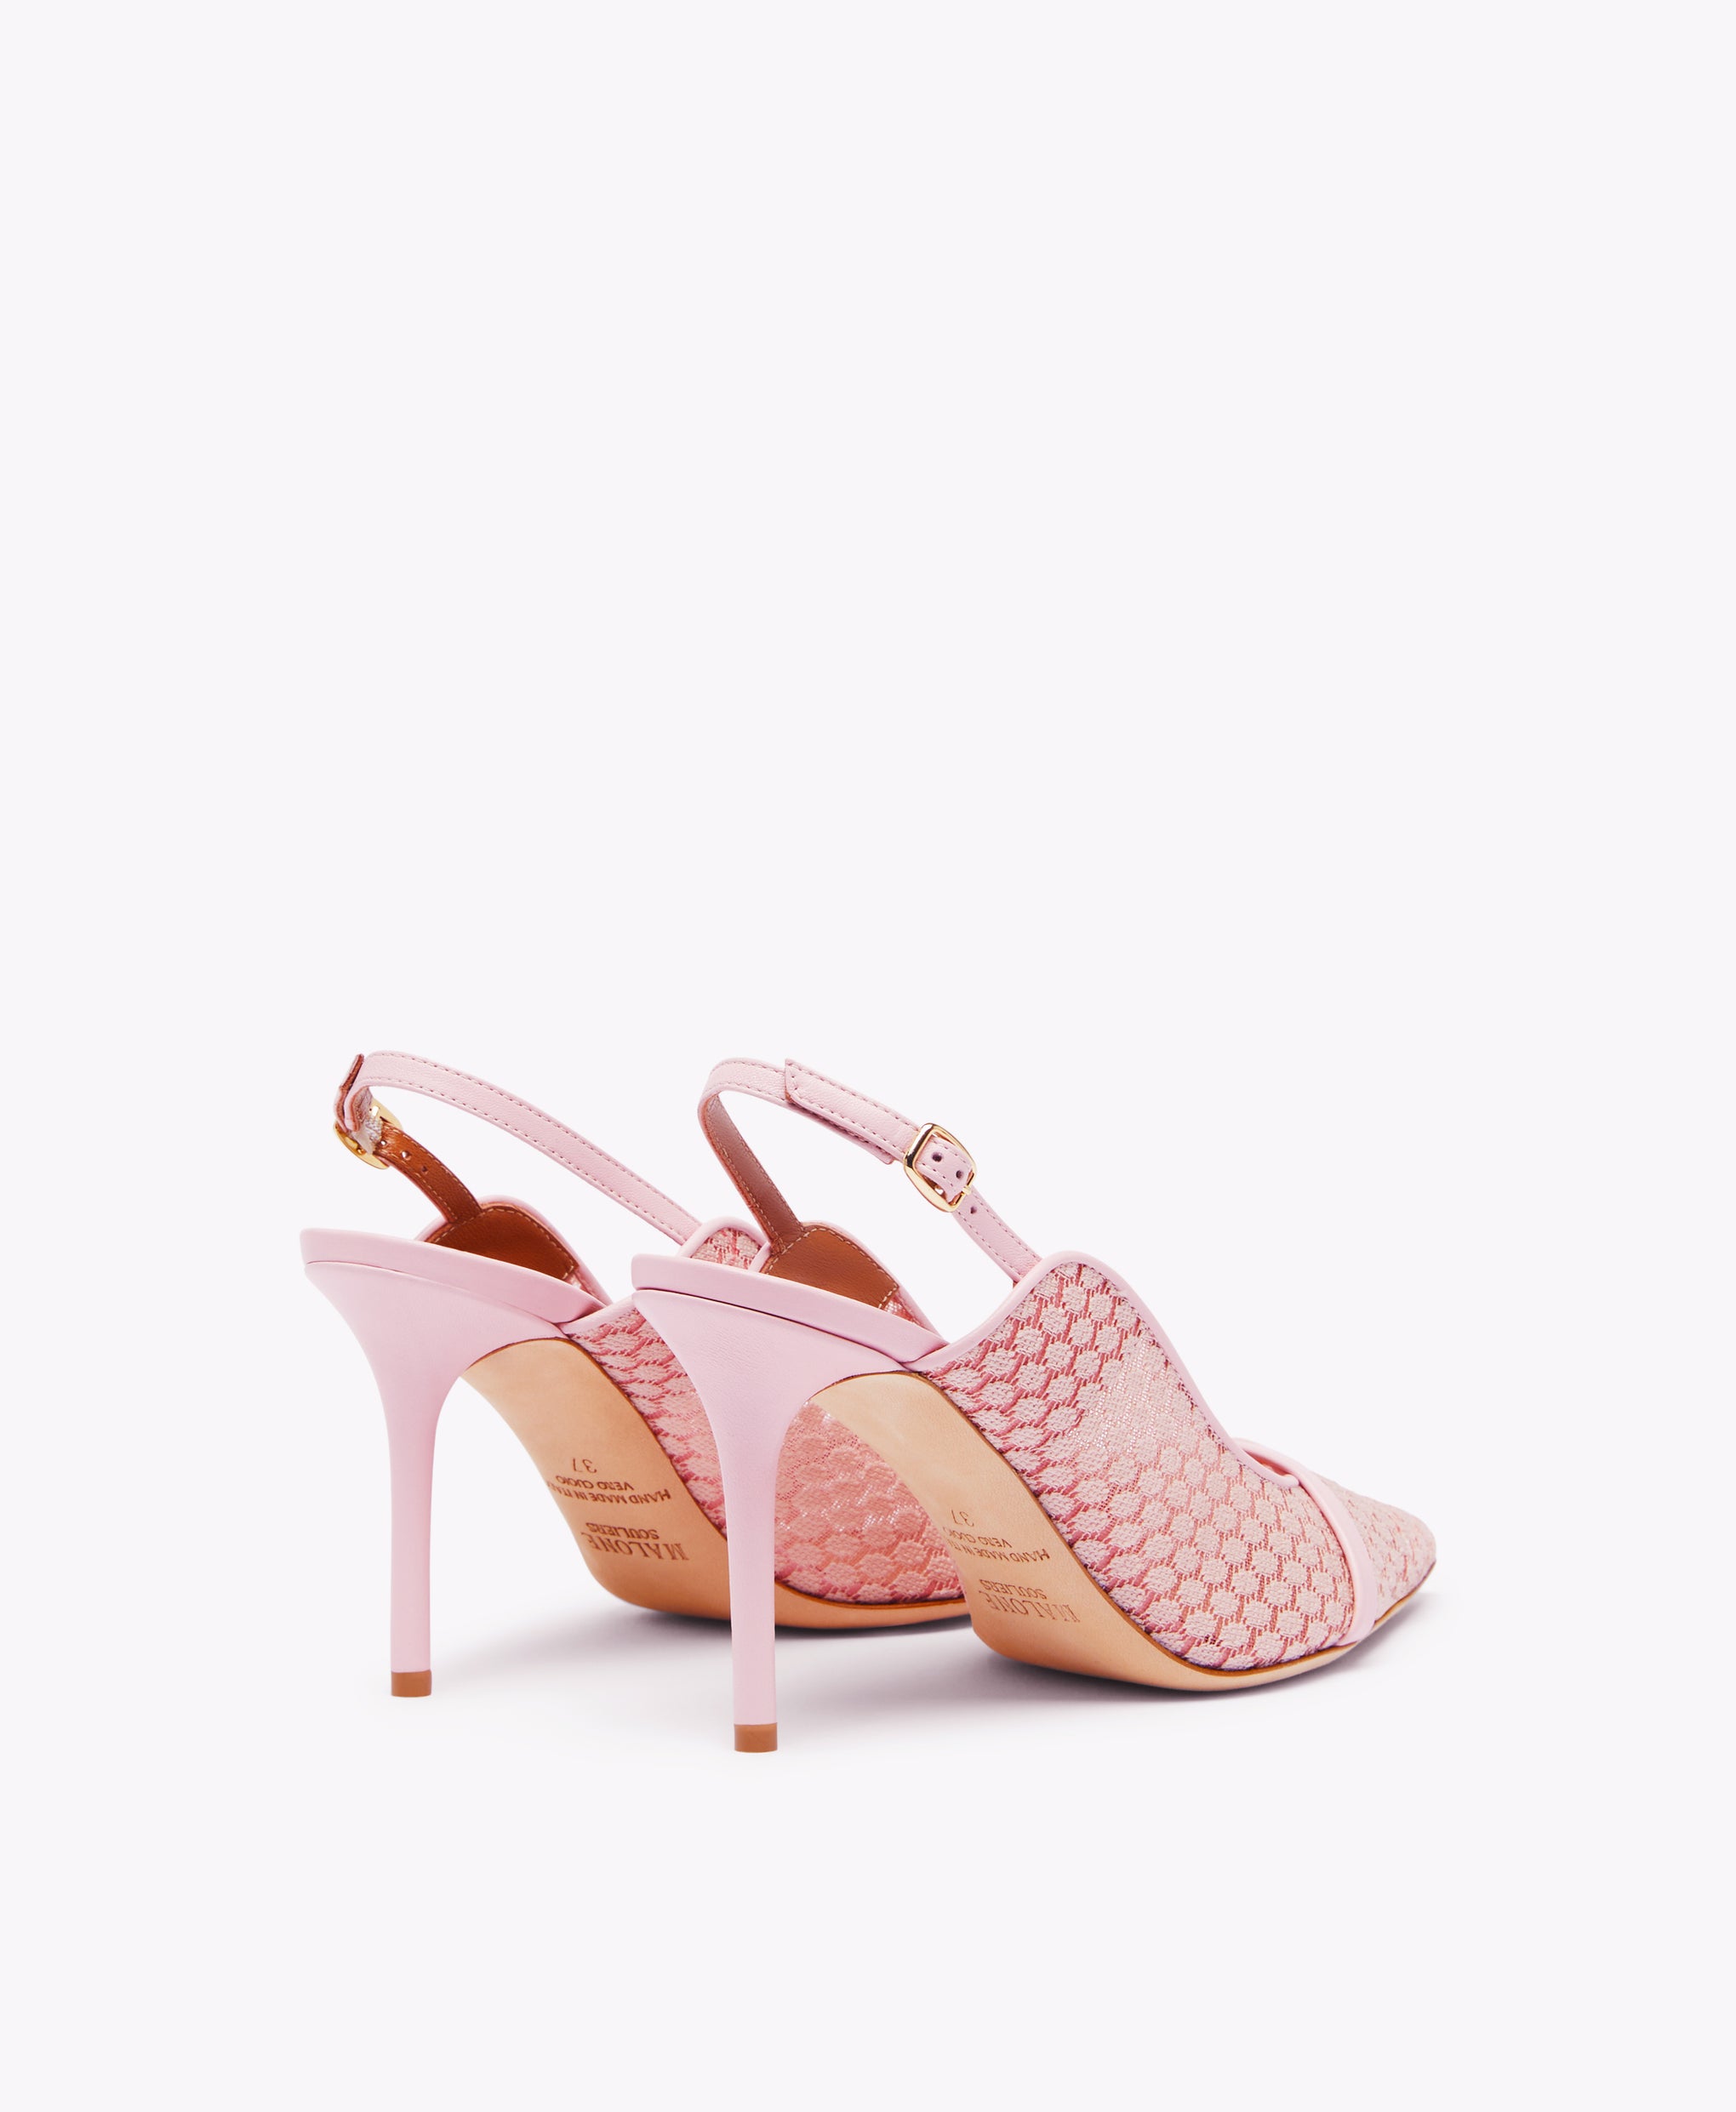 Malone Souliers Marion 85mm Light Pink Lace Mesh Slingback Heels